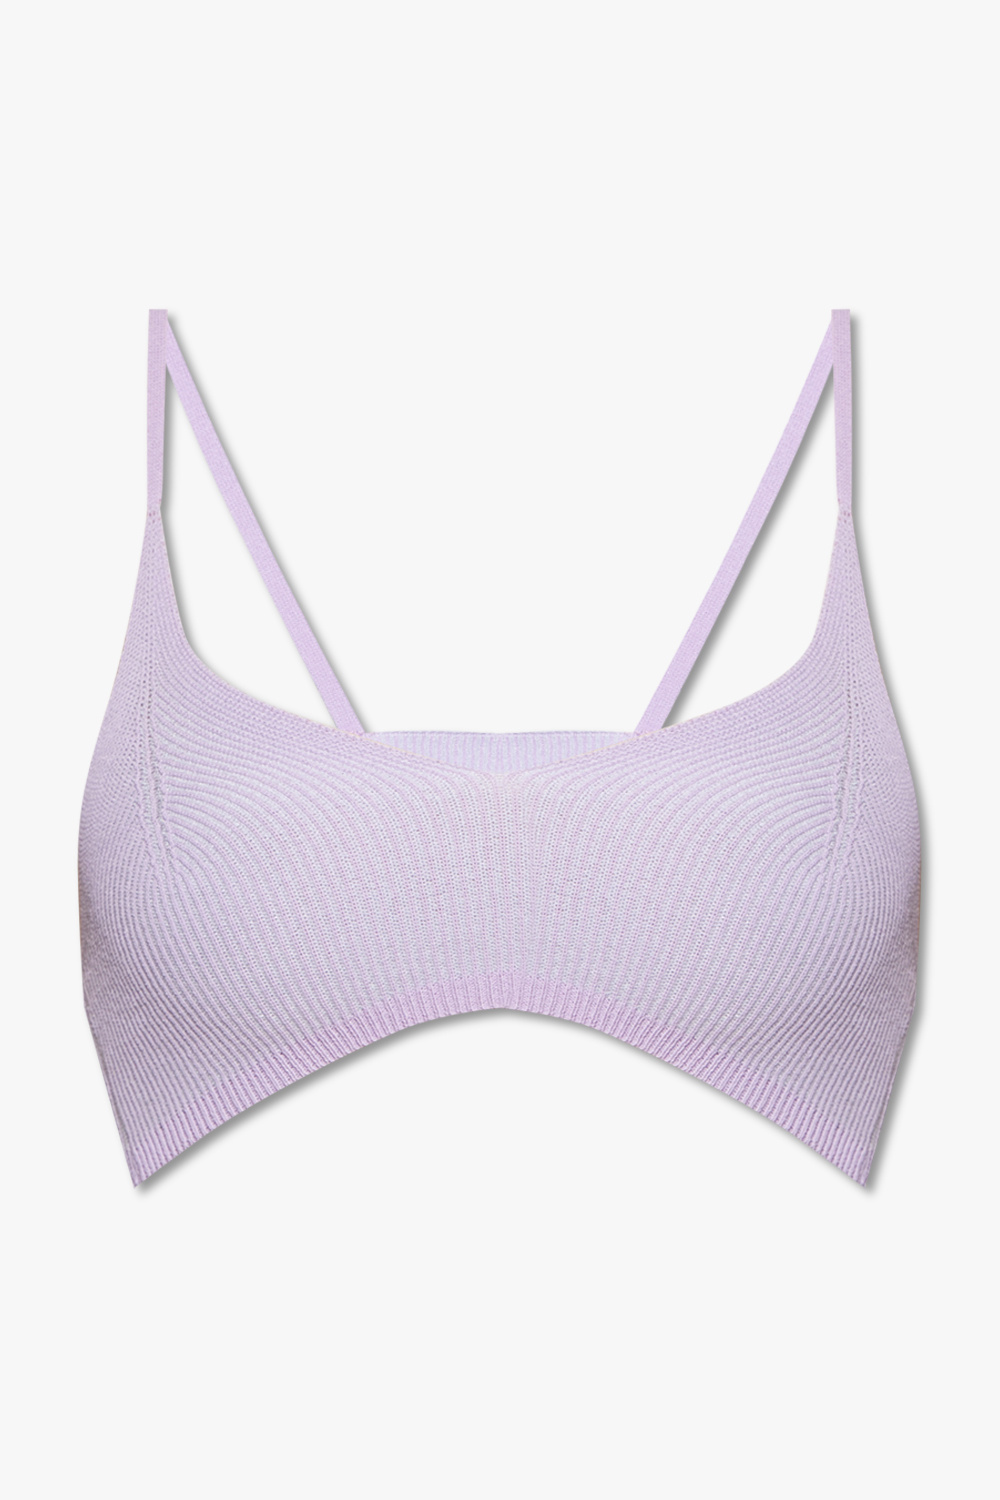 Jacquemus ‘Valensole’ cropped tank top